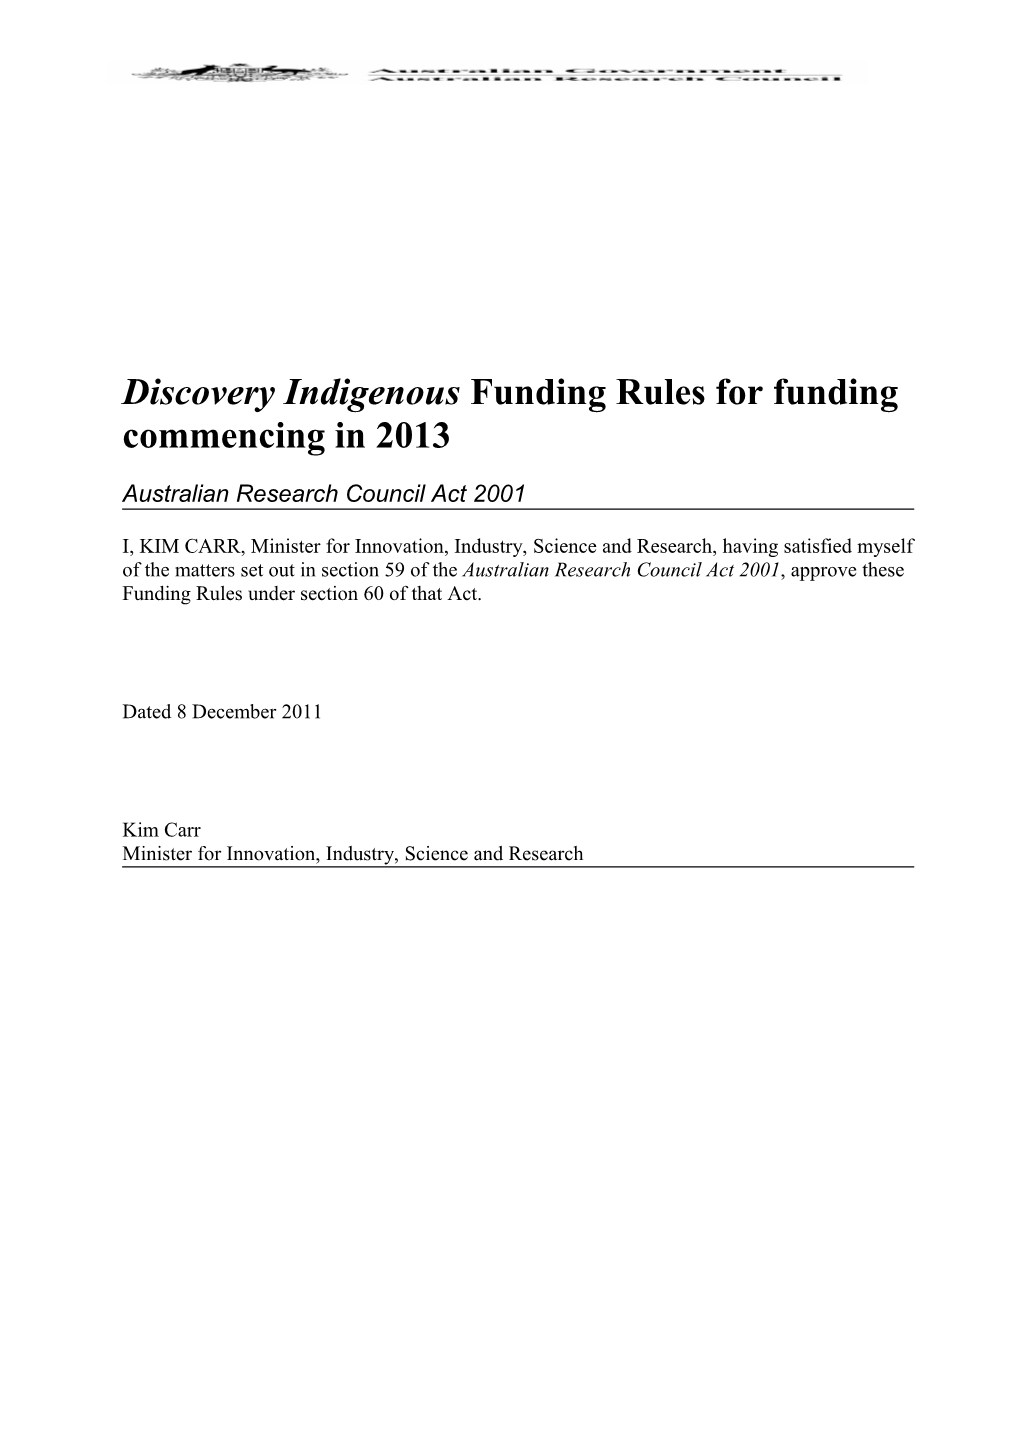 Discovery Indigenous Funding Rules for Funding Commencing in 2012